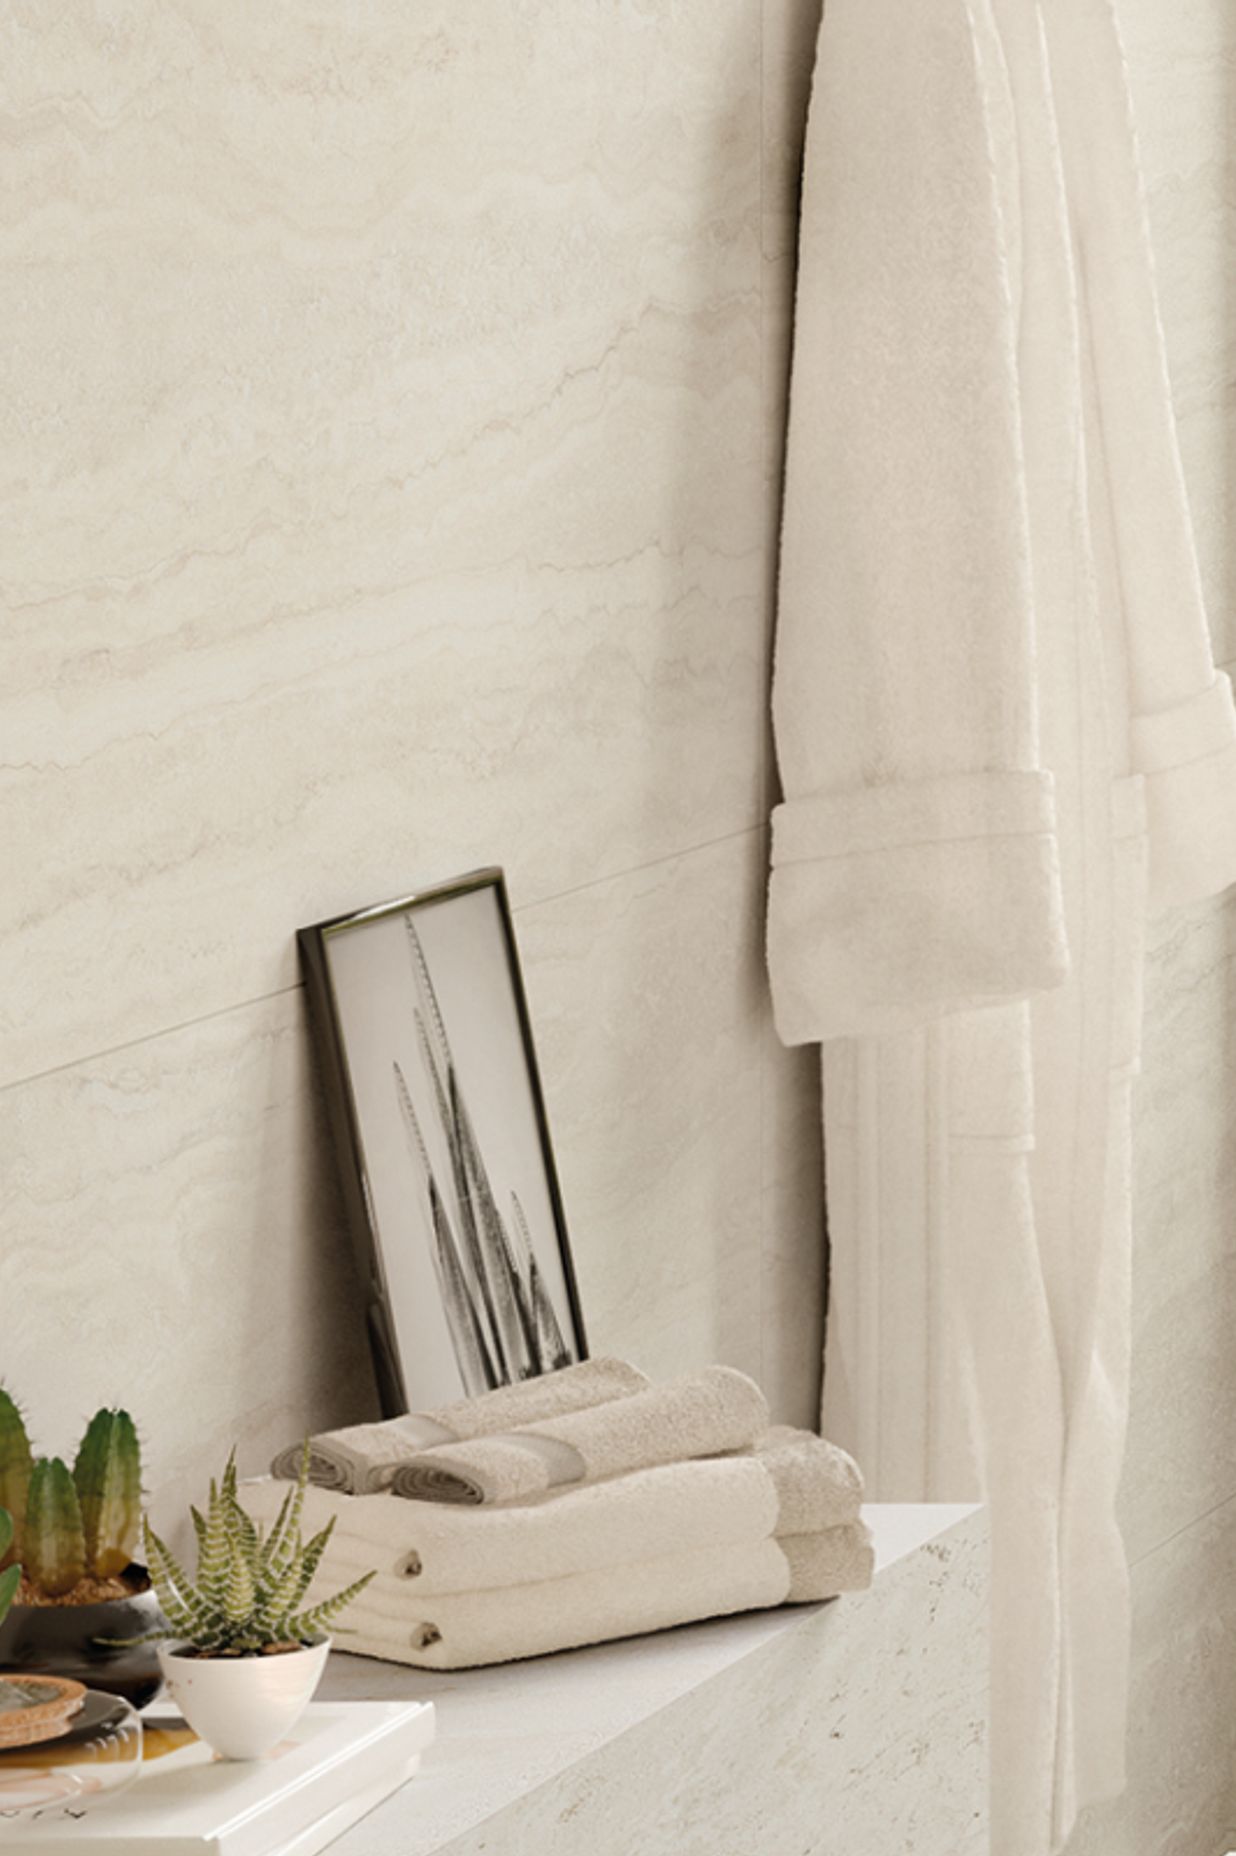 Quantum's Unique Travertine floor and wall tiles are a beautiful porcelain interpretation of the natural stone – its tone and natural matte surface effective in creating a relaxing, spa-like environment.